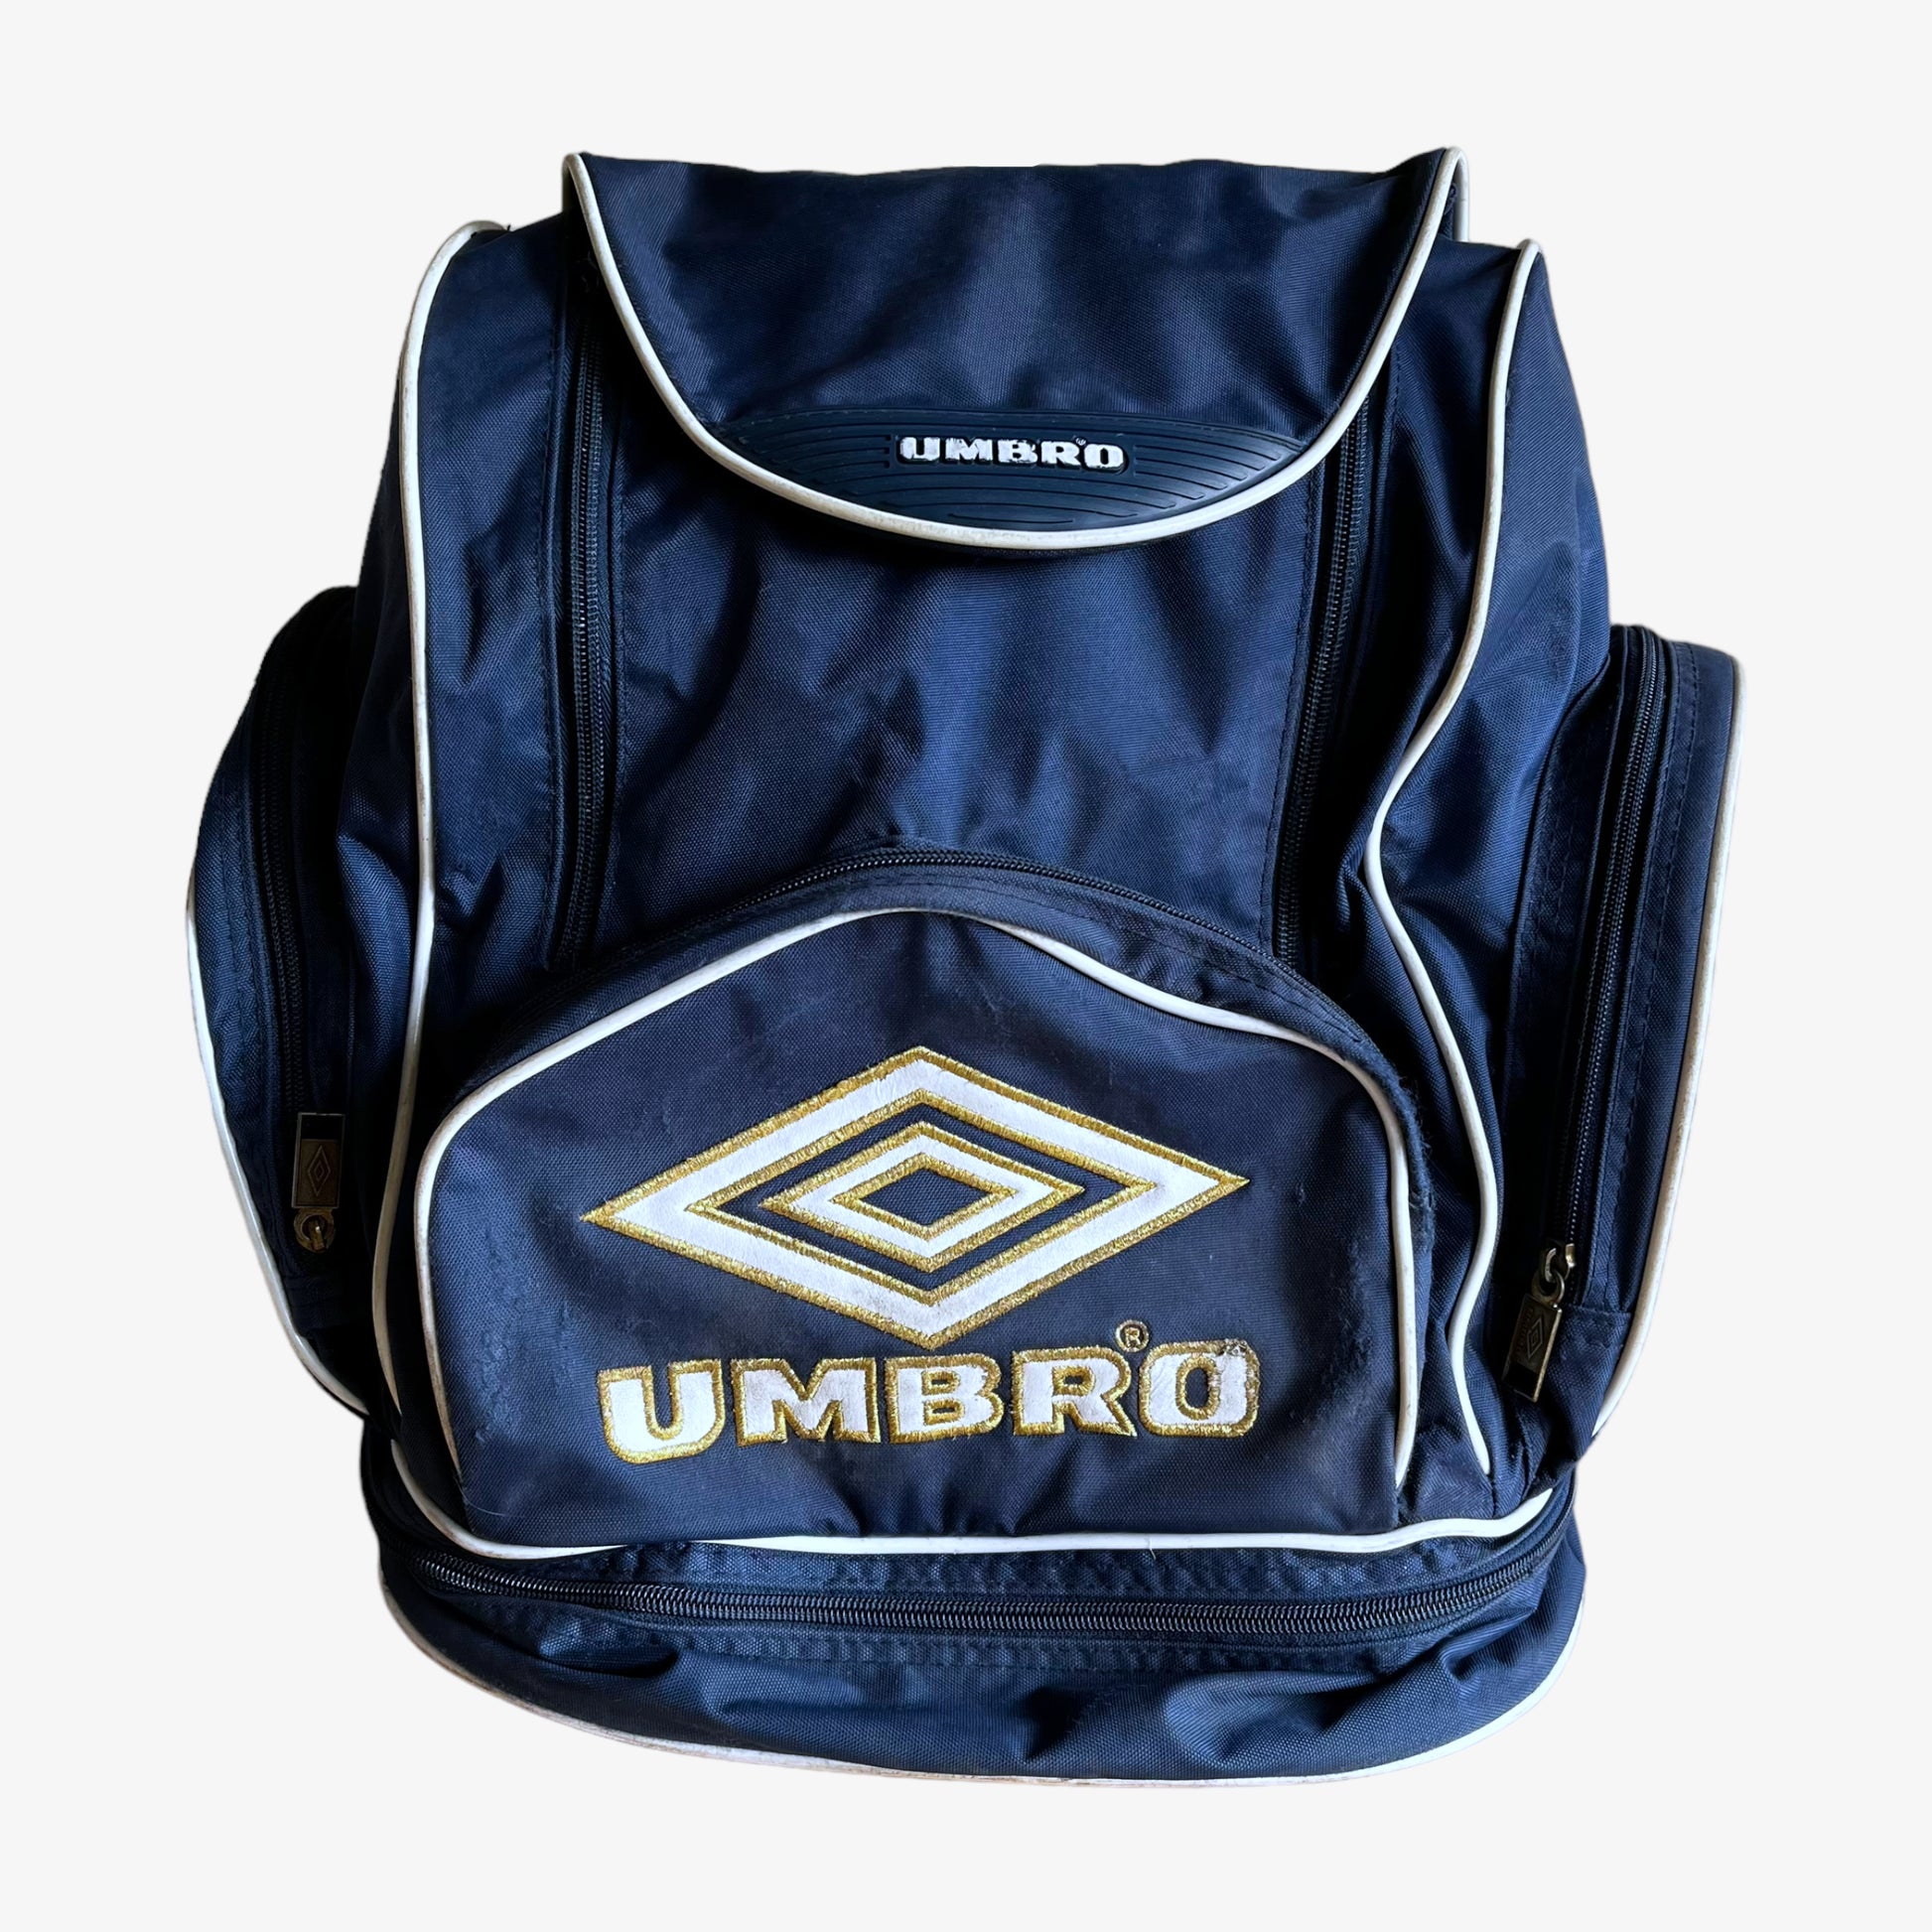 Vintage 90s Umbro Sports Big Blue Backpack Featuring An Embroidered Spell Out Logo - Casspios Dream